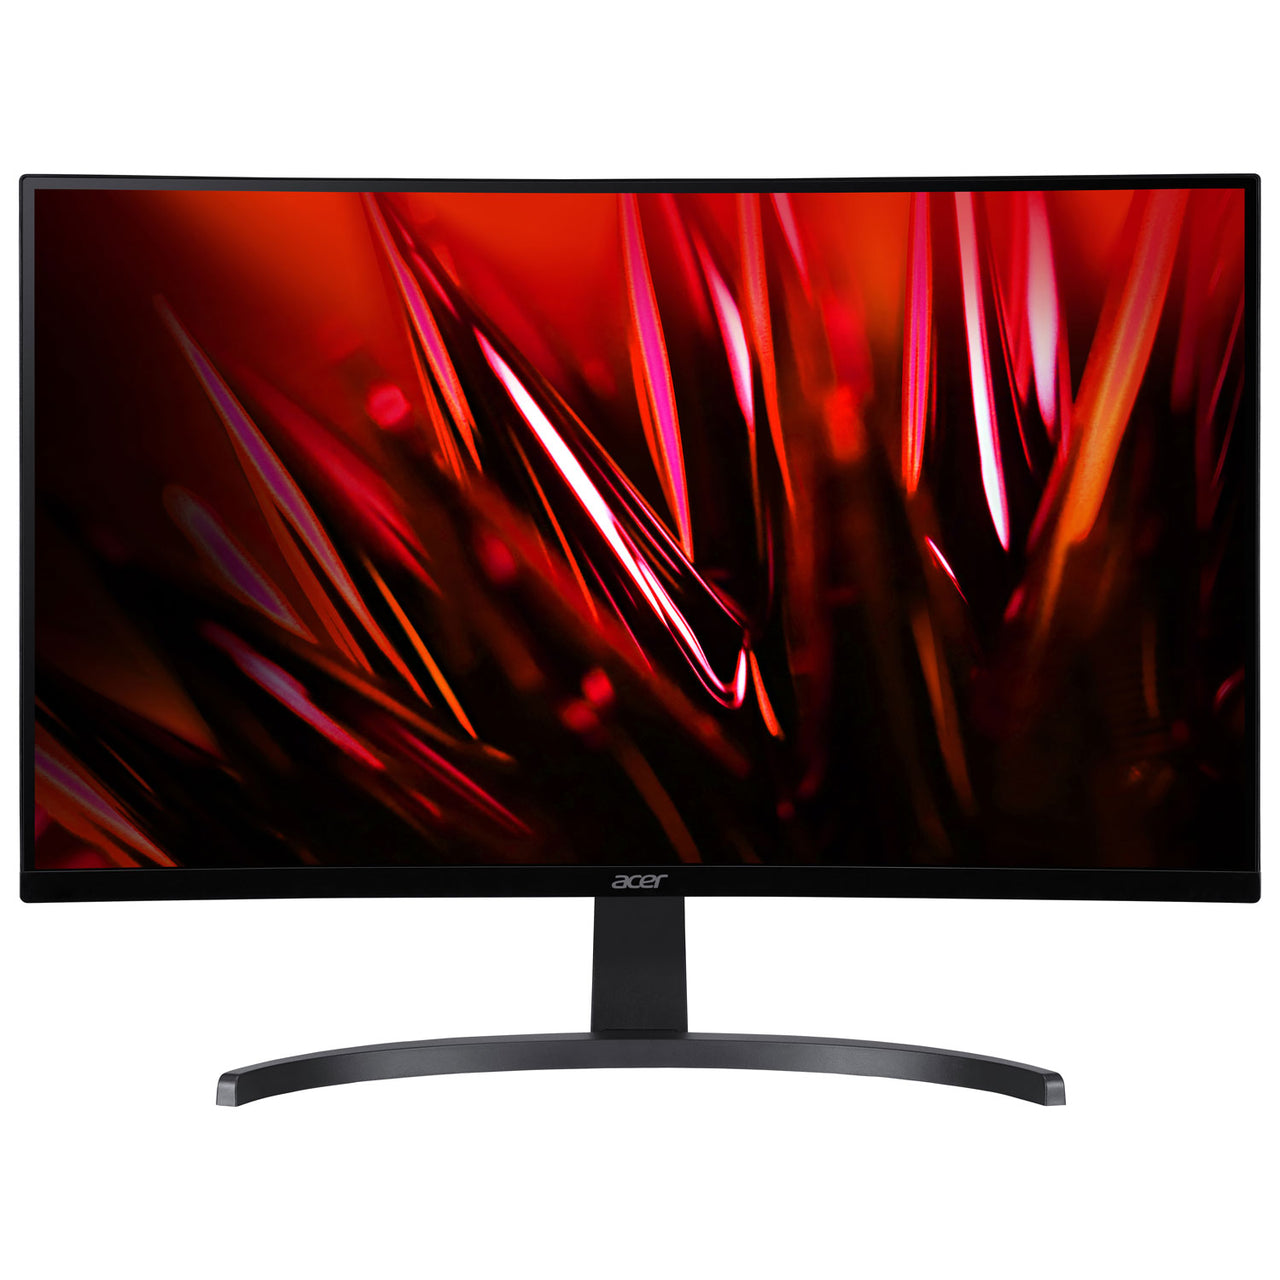 Acer 27" FHD 165Hz 1ms GTG Curved LED FreeSync Gaming Monitor (ED273 PBIIPX) - Black